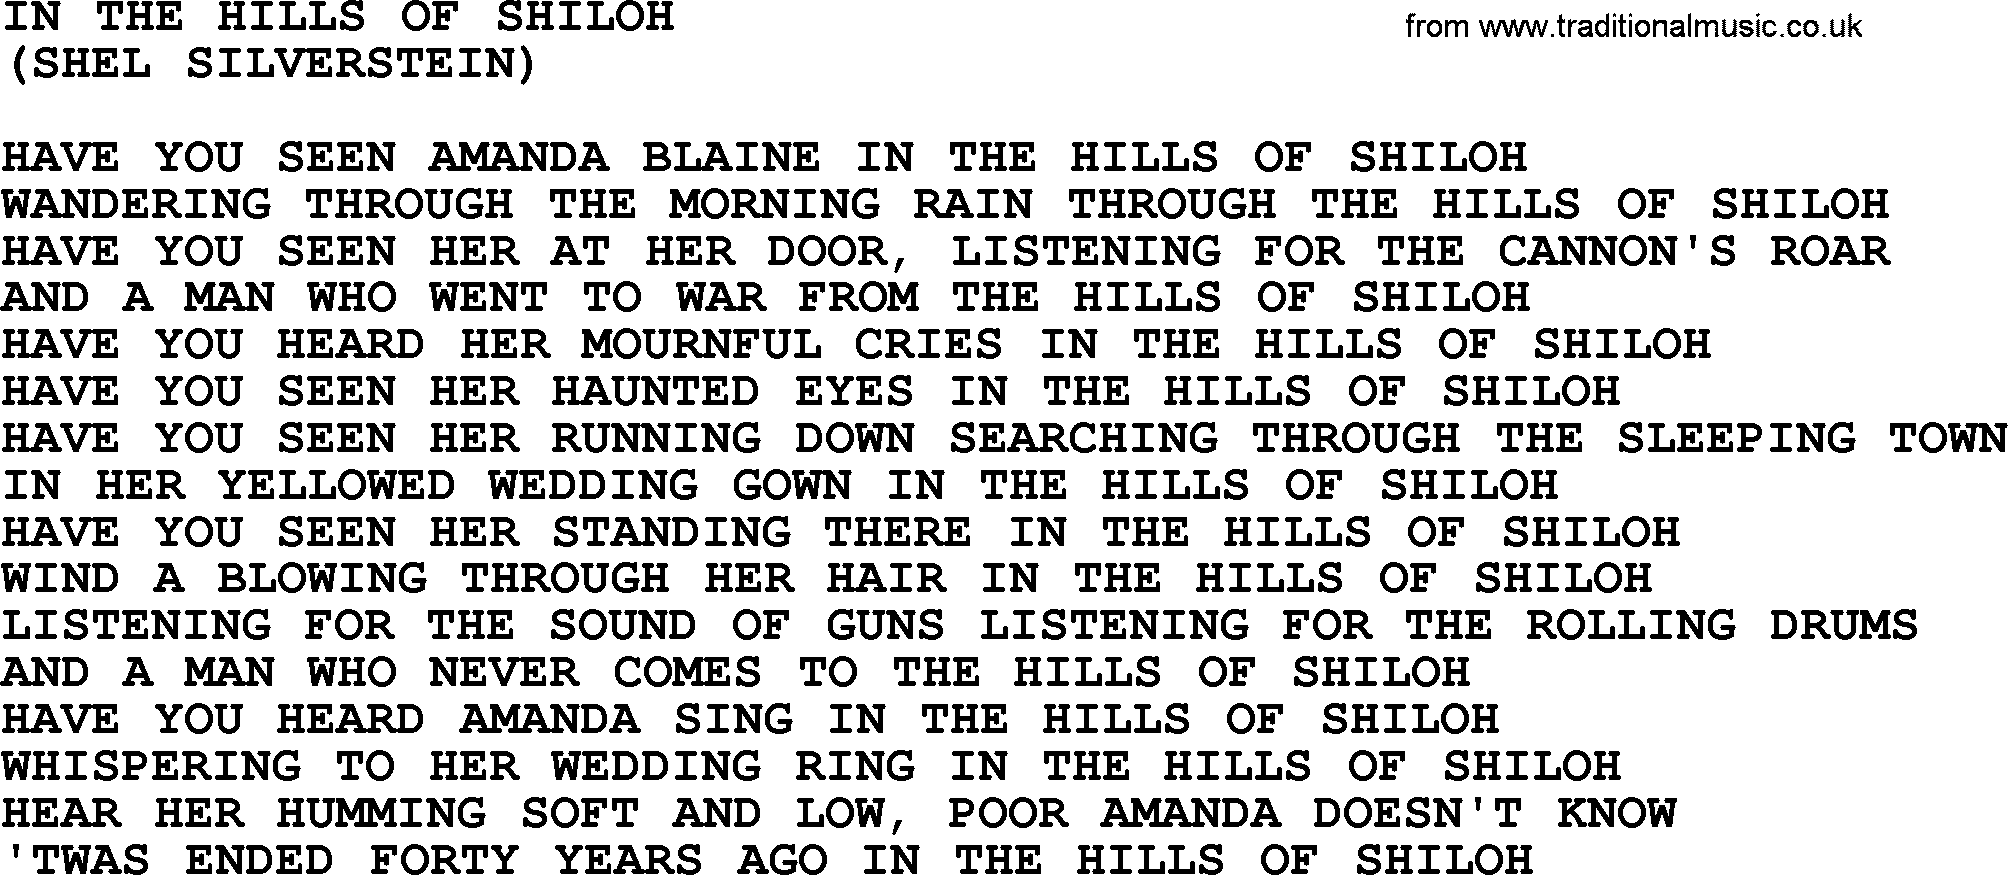 The Byrds song In The Hills Of Shiloh, lyrics